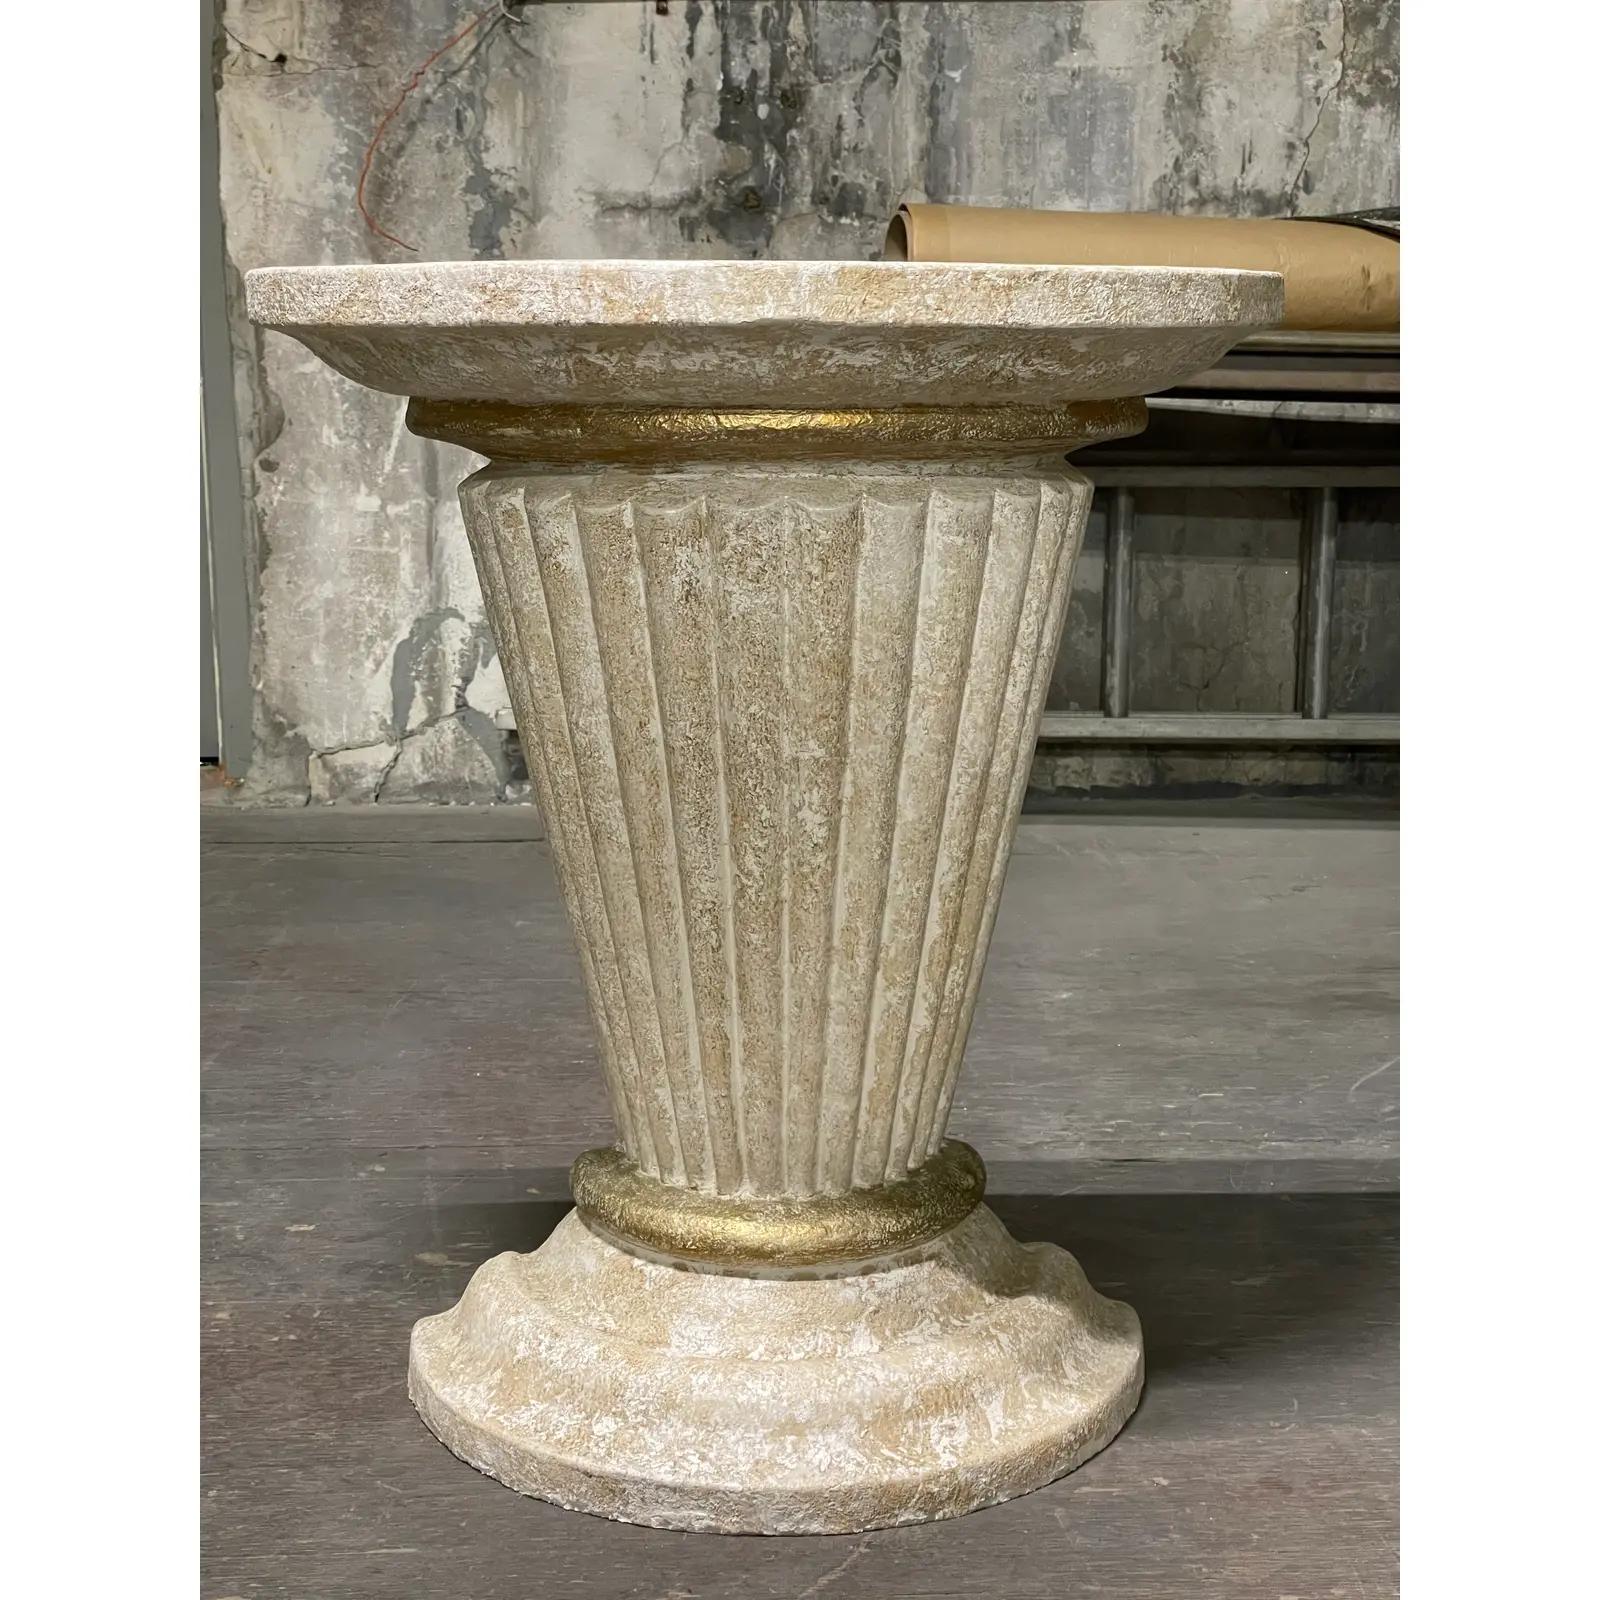 Large unique neoclassical plaster floor vase. Fluted tapered design with a textural finish.
Curbside to NYC/Philly $400